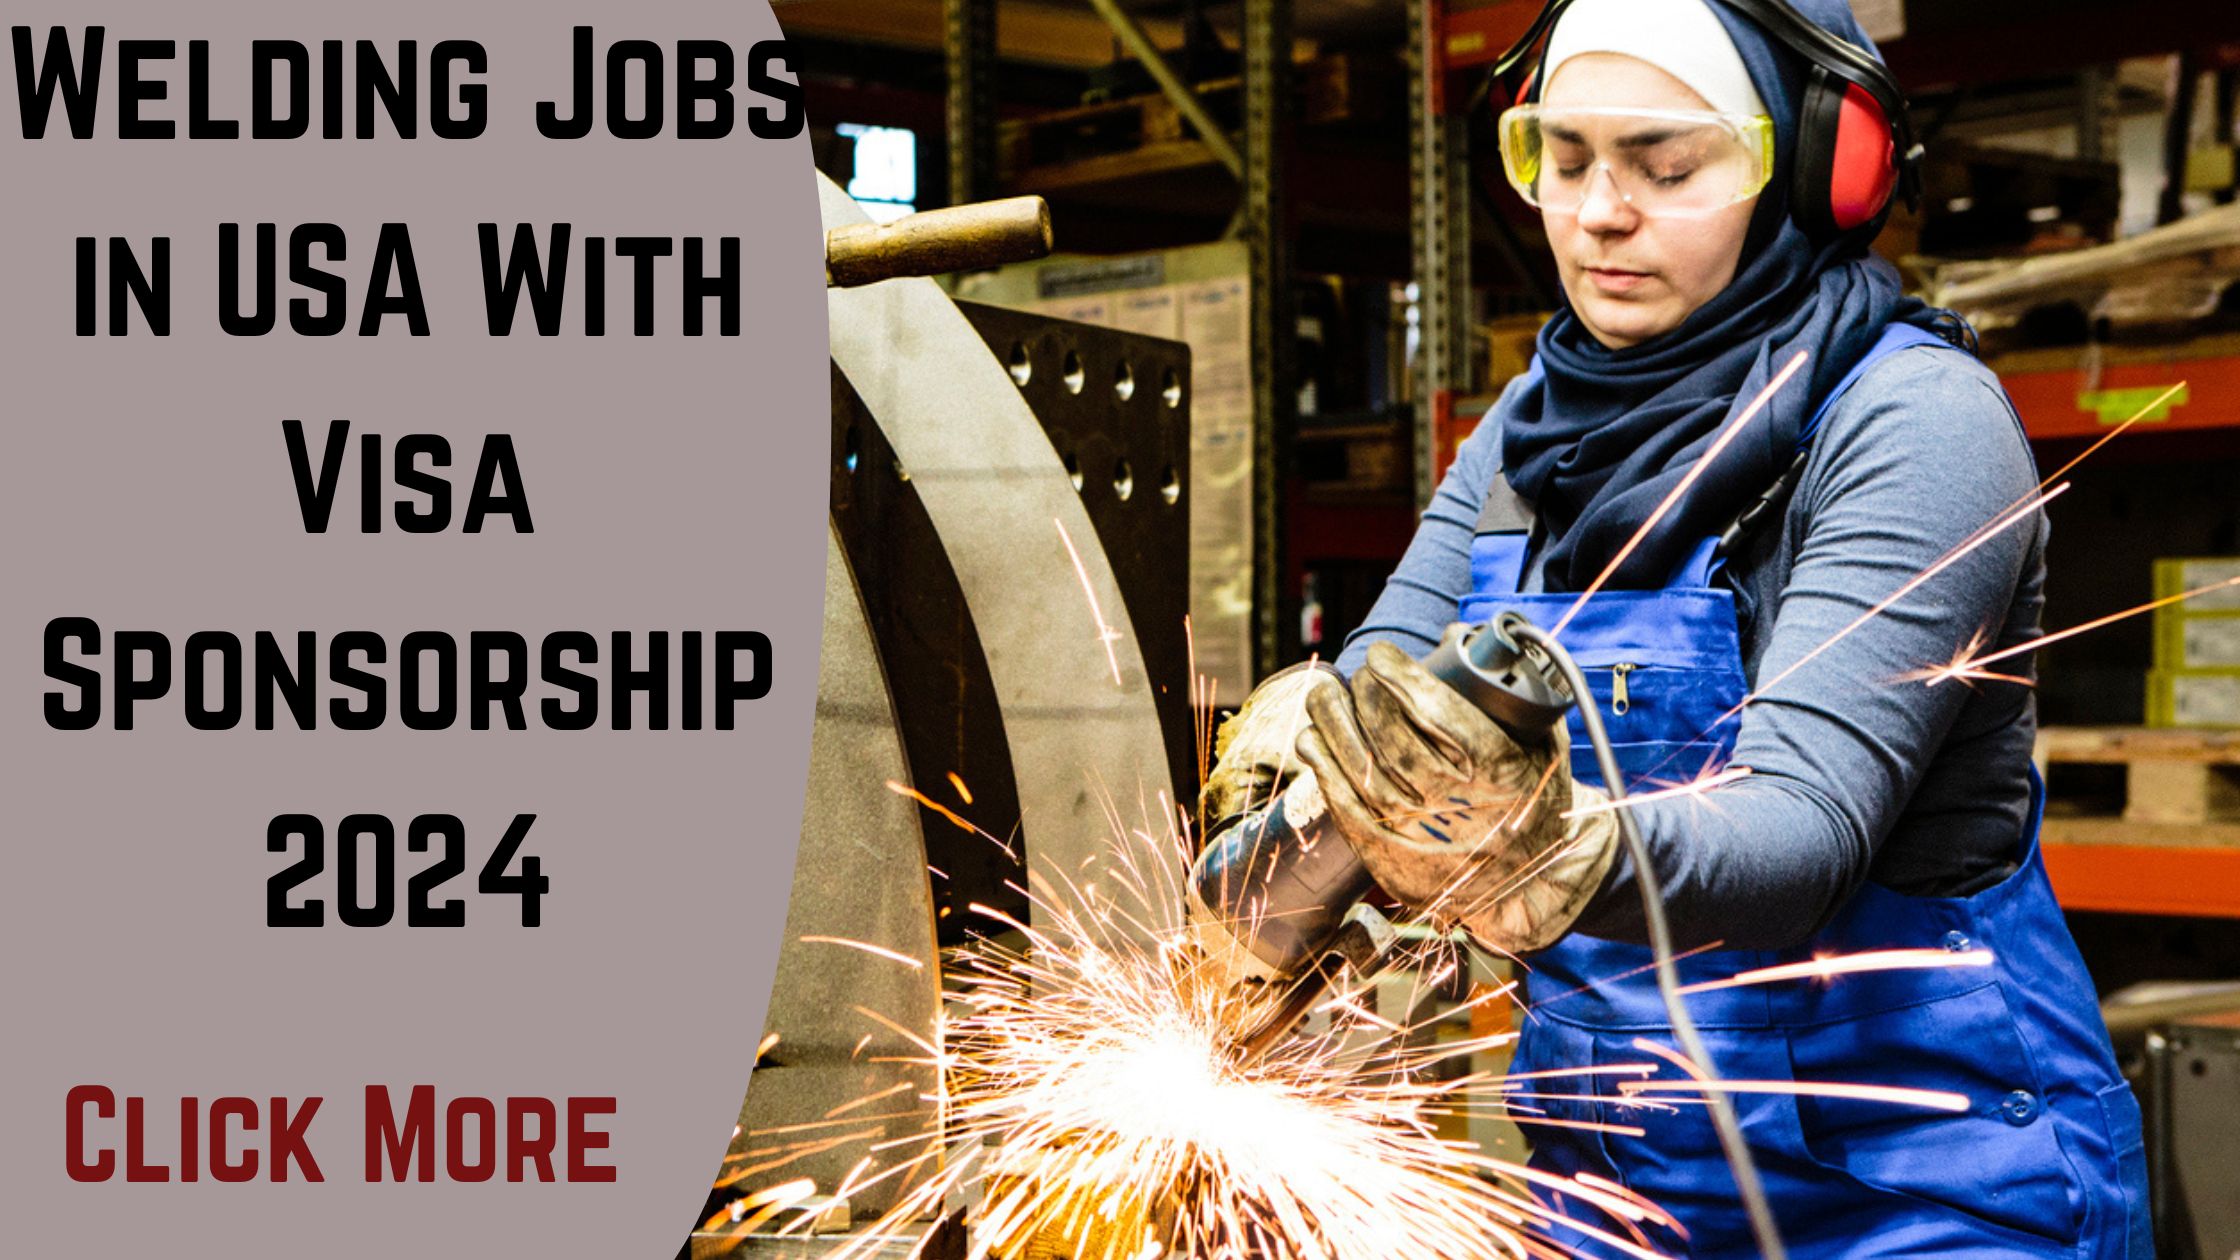 Welding Jobs in the USA With Visa Sponsorship